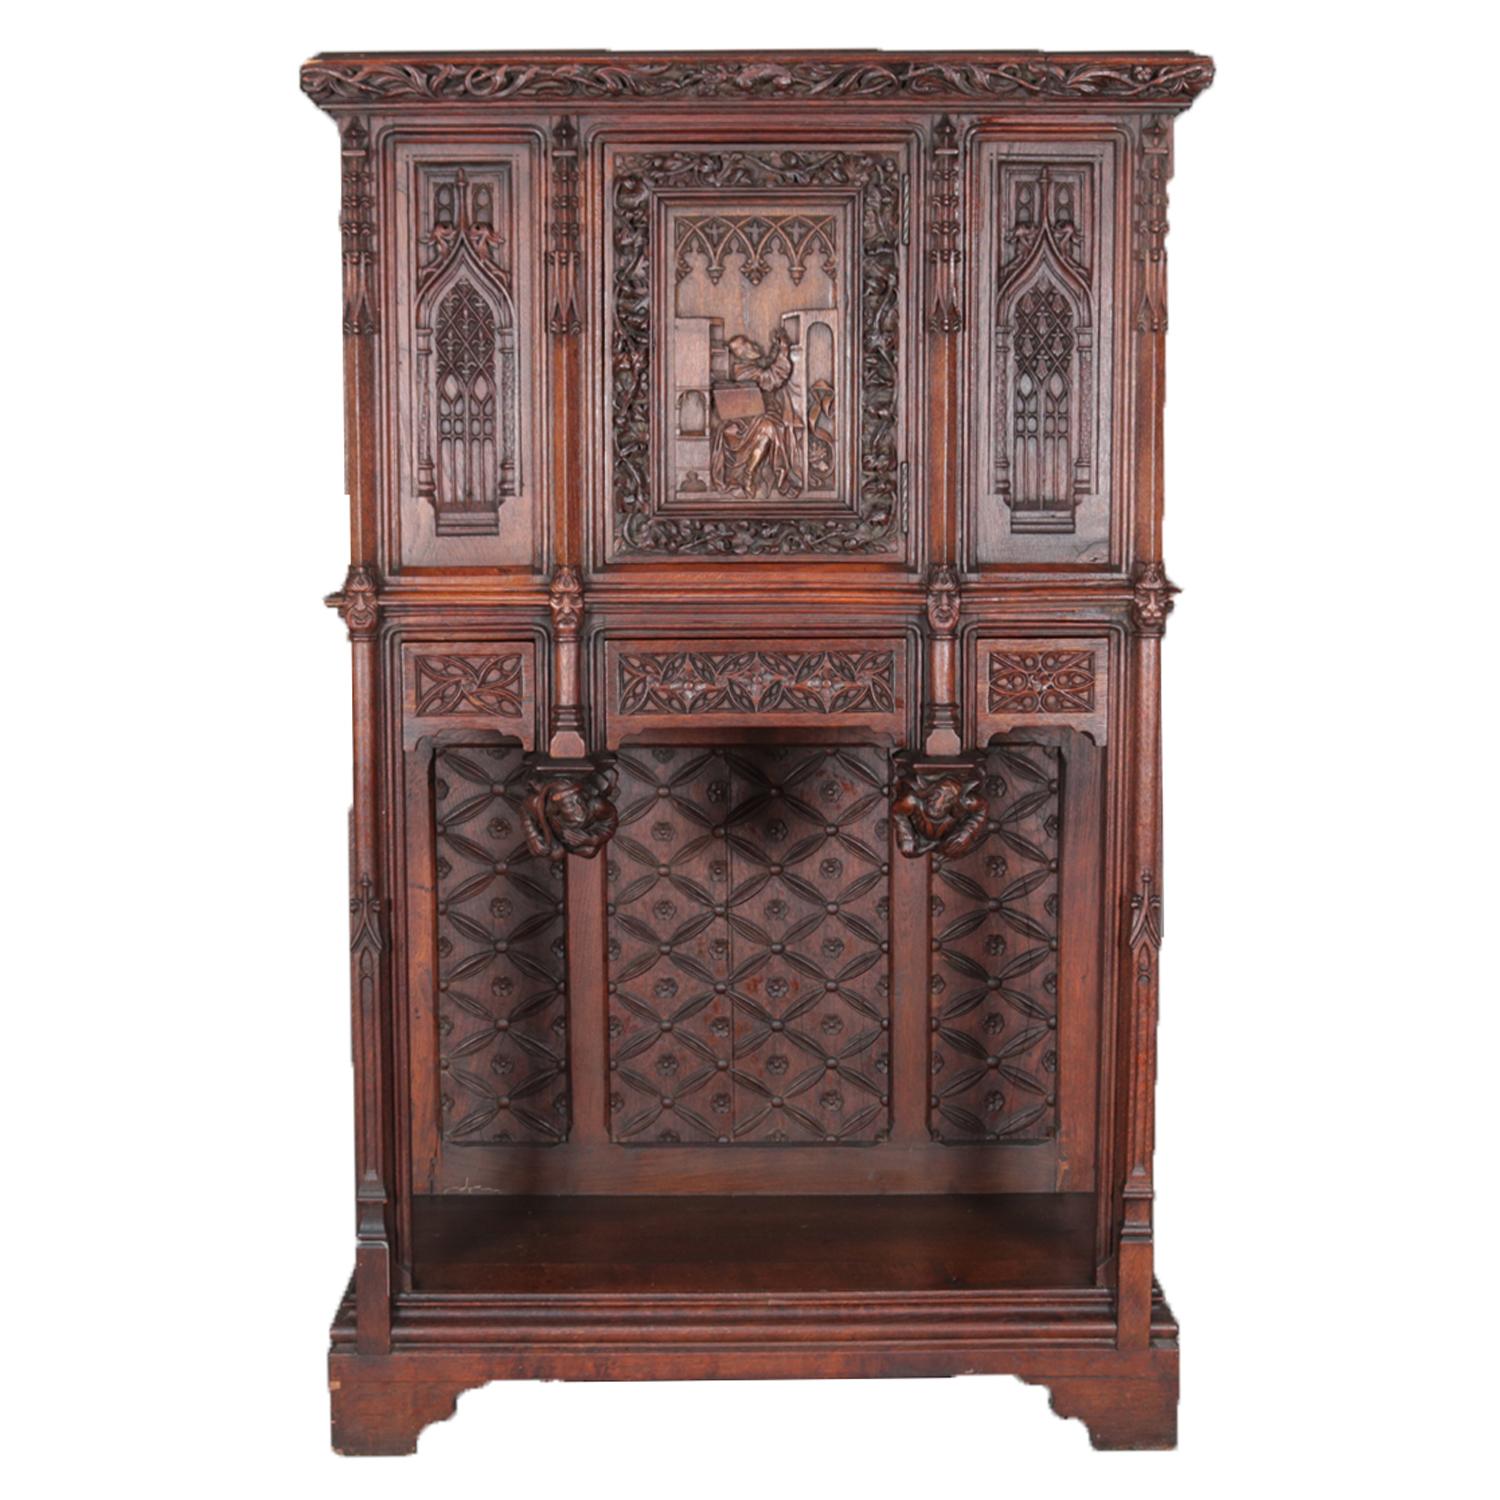 An antique Gothic Revival oak cabinet features upper with central door having heavily carved pictorial scene depicting monk priest in study, flanked by panels with cathedral arch design surmounting three drawers having foliate design with figural